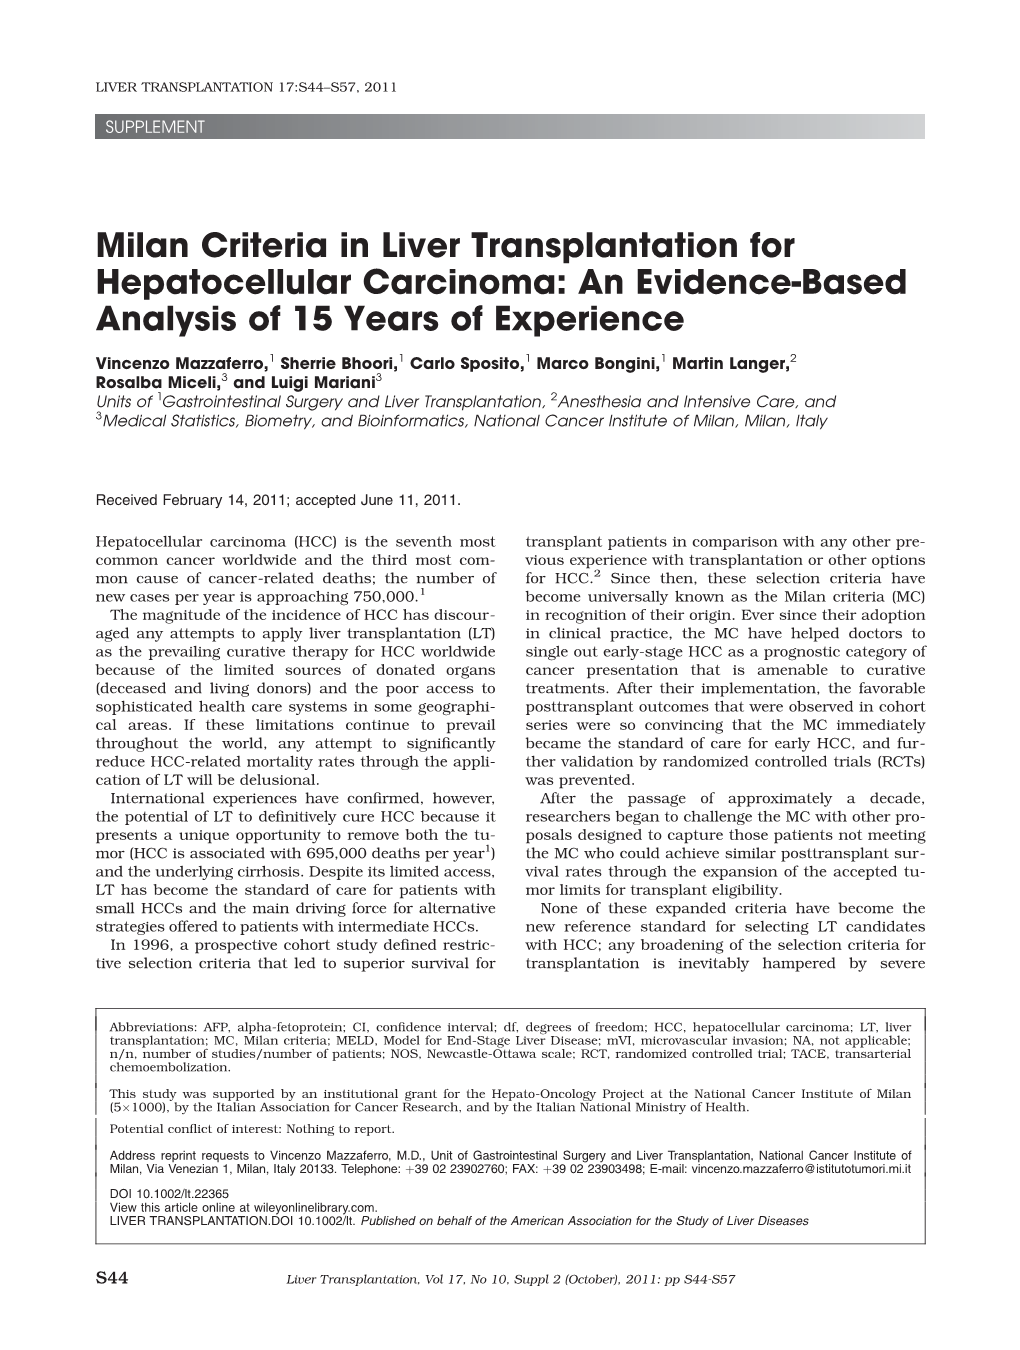 Milan Criteria in Liver Transplantation for Hepatocellular Carcinoma: an Evidence-Based Analysis of 15 Years of Experience